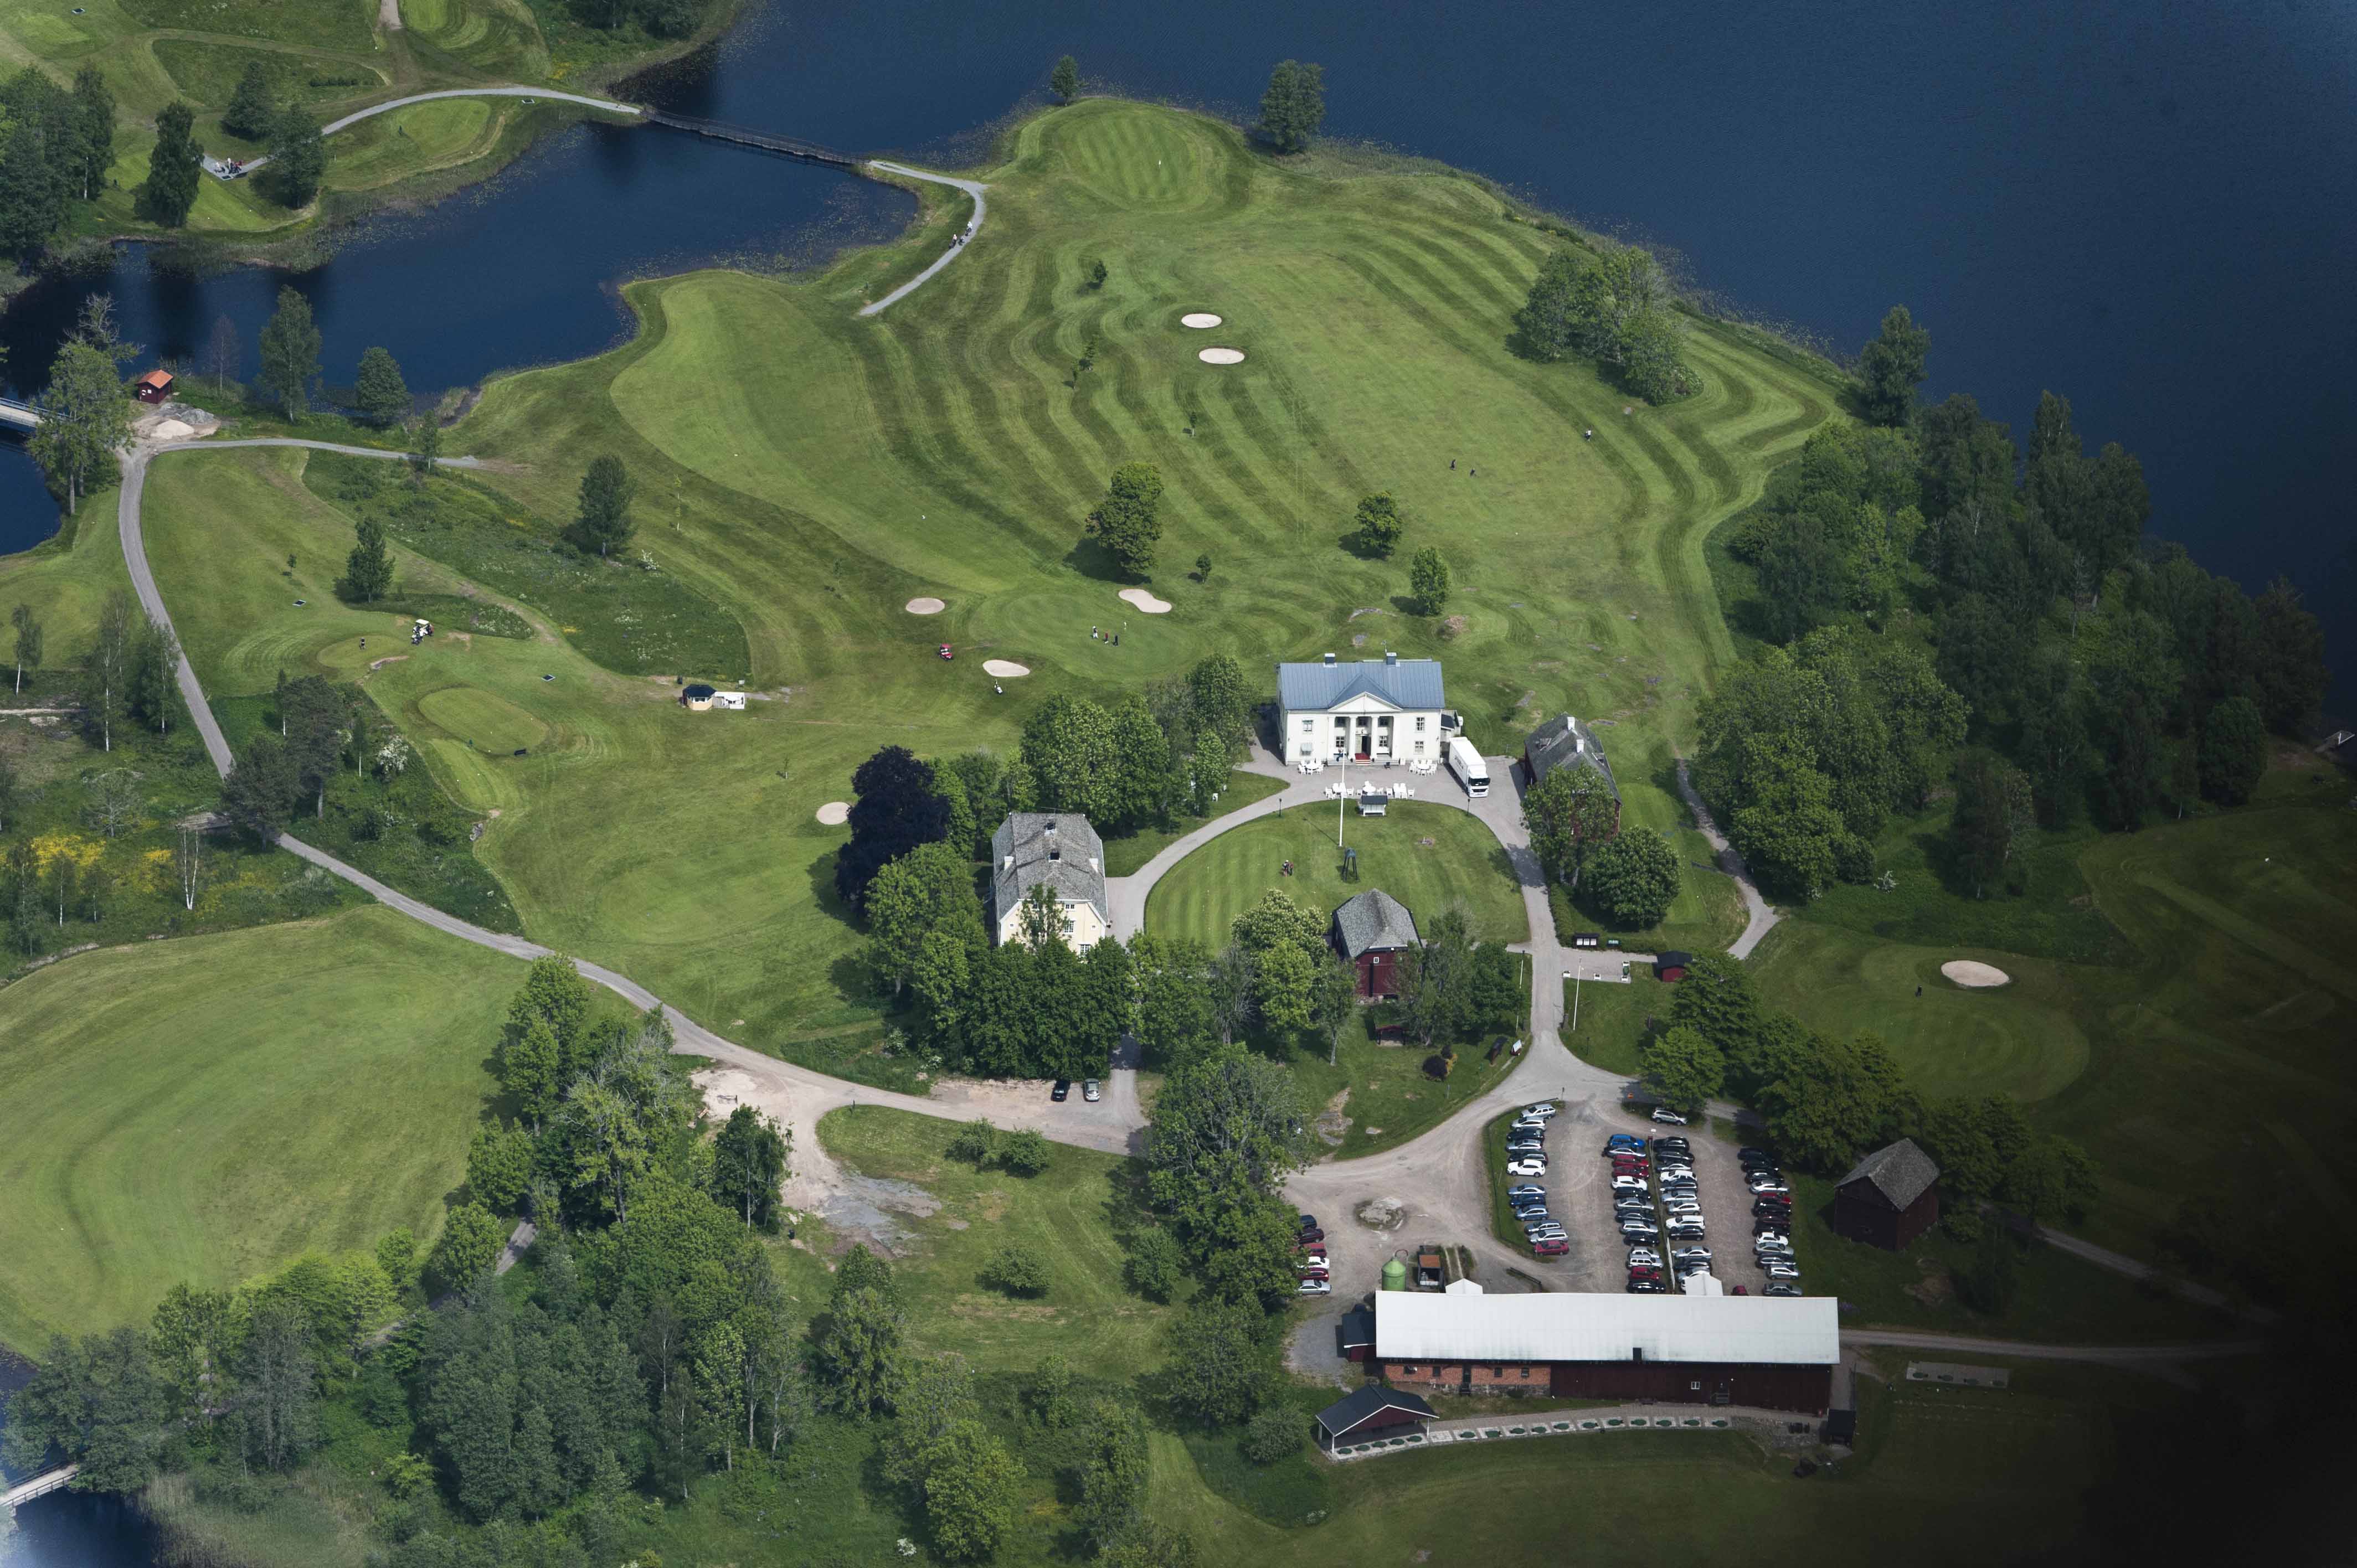 Forsbacka Golf Club, just a few minutes away from our cottage in Dalsland